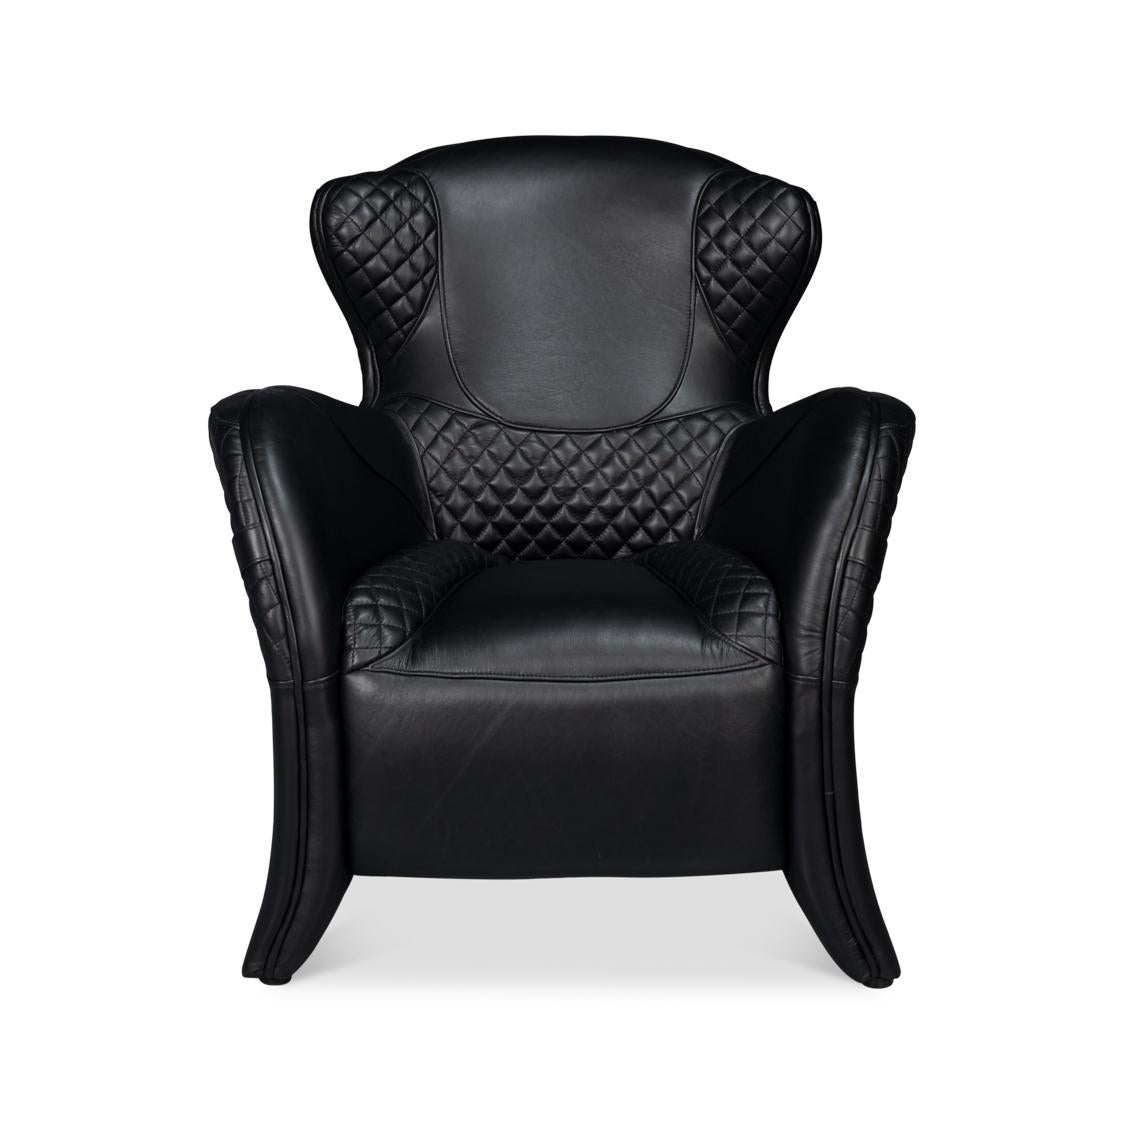 With top grain Onyx black leather, with a sloping rear and curved arms, with a partially quilted seat and backrest, with decorative buckles.
Dimensions: 31